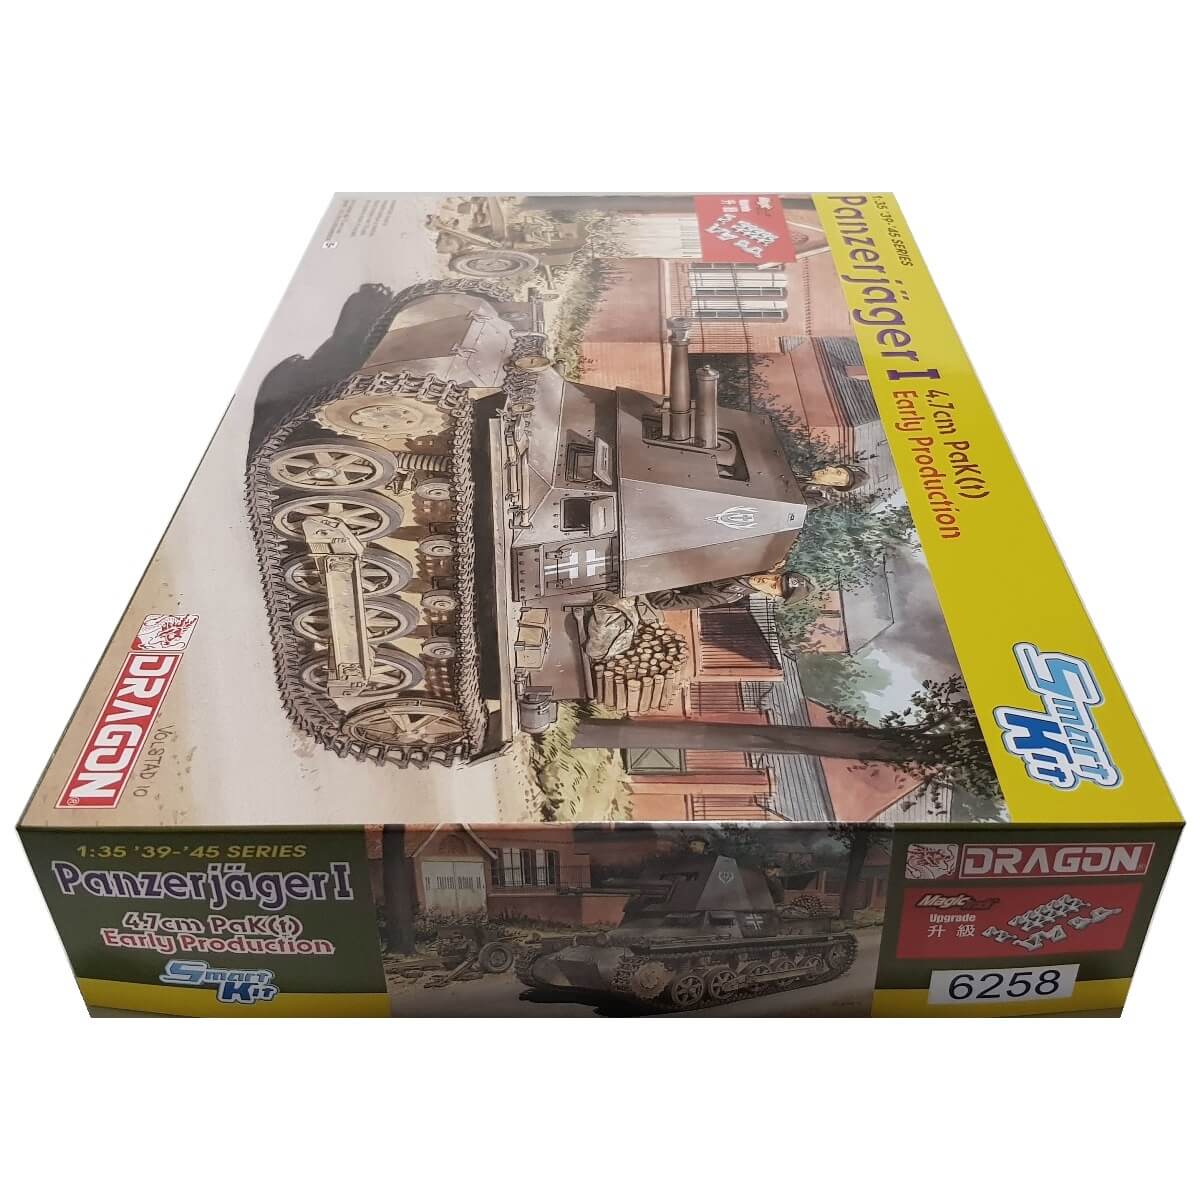 1:35 Panzerjager I 4.7cm PaK(t) - Early Production - DRAGON